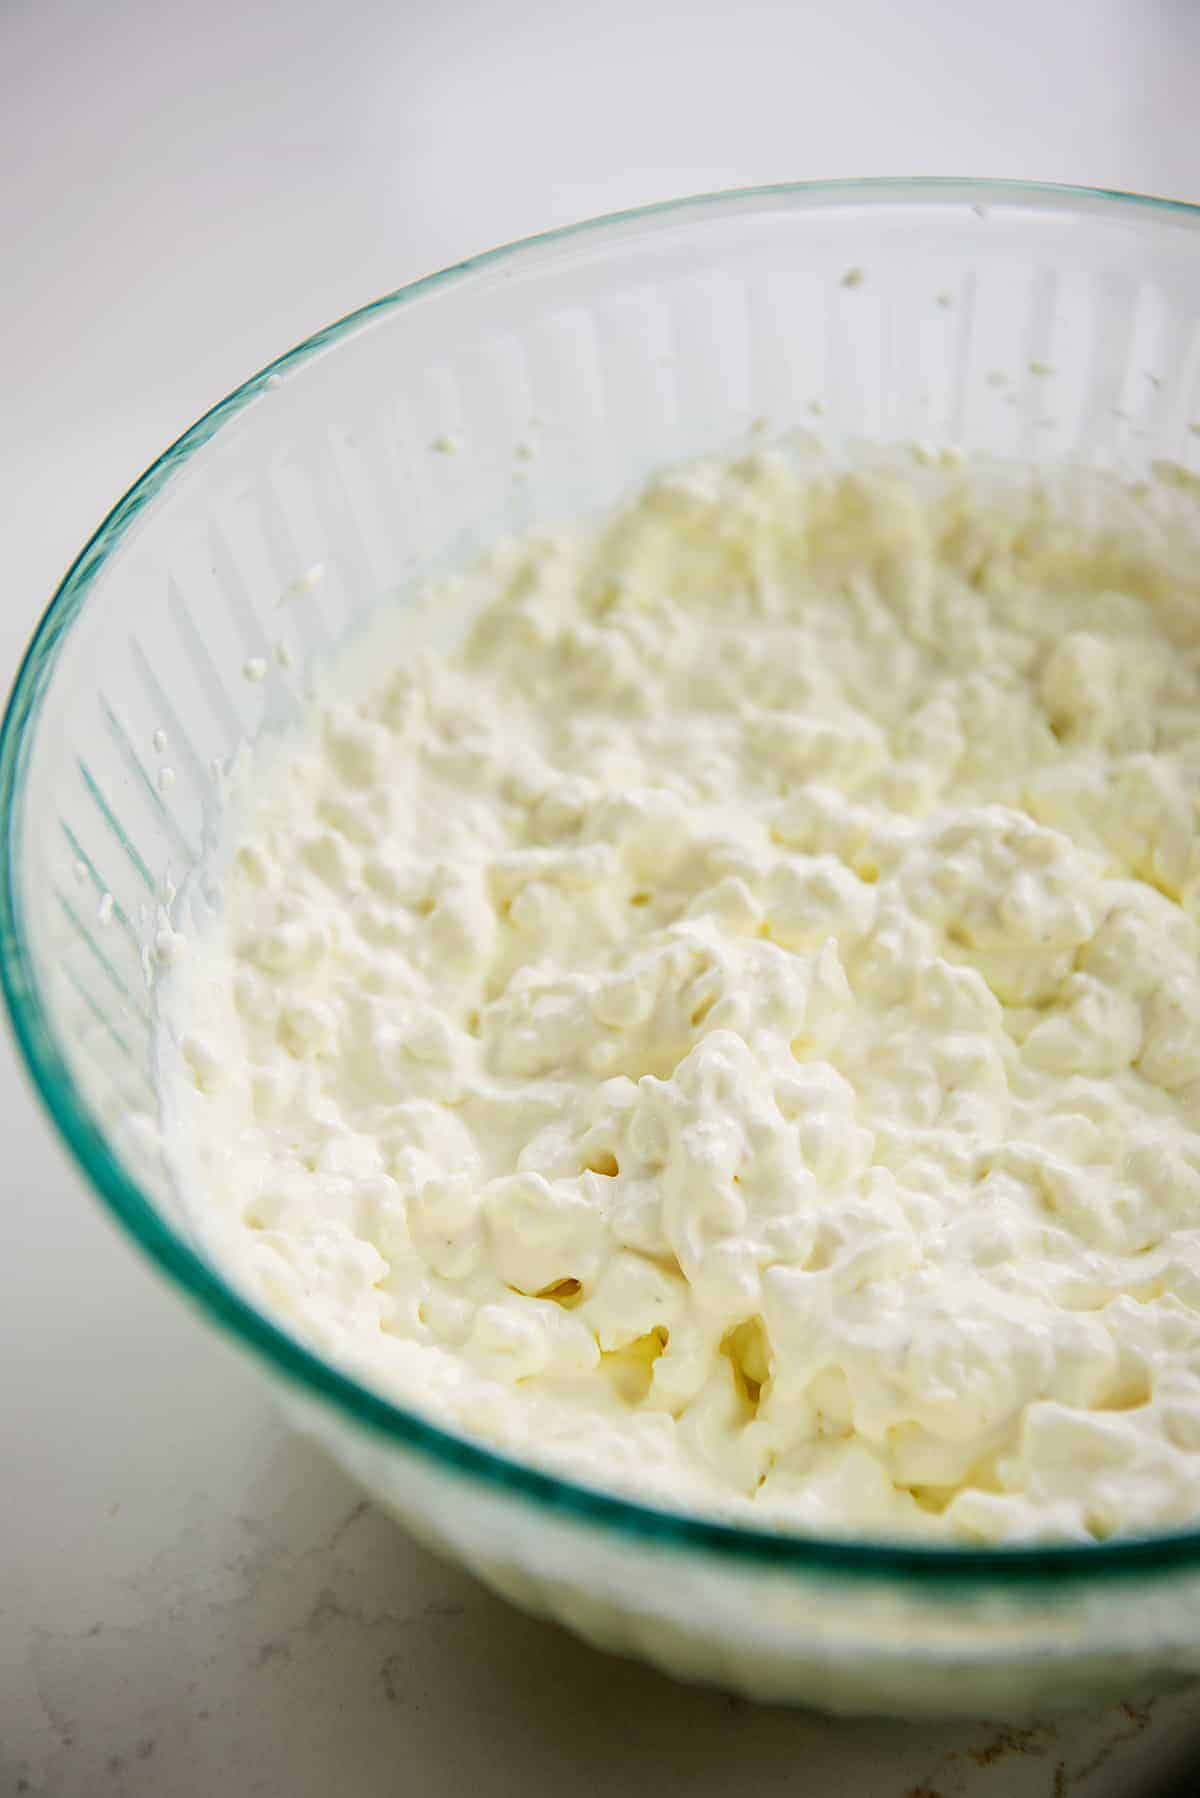 cream cheese, cottage cheese, and sour cream in glass bowl.